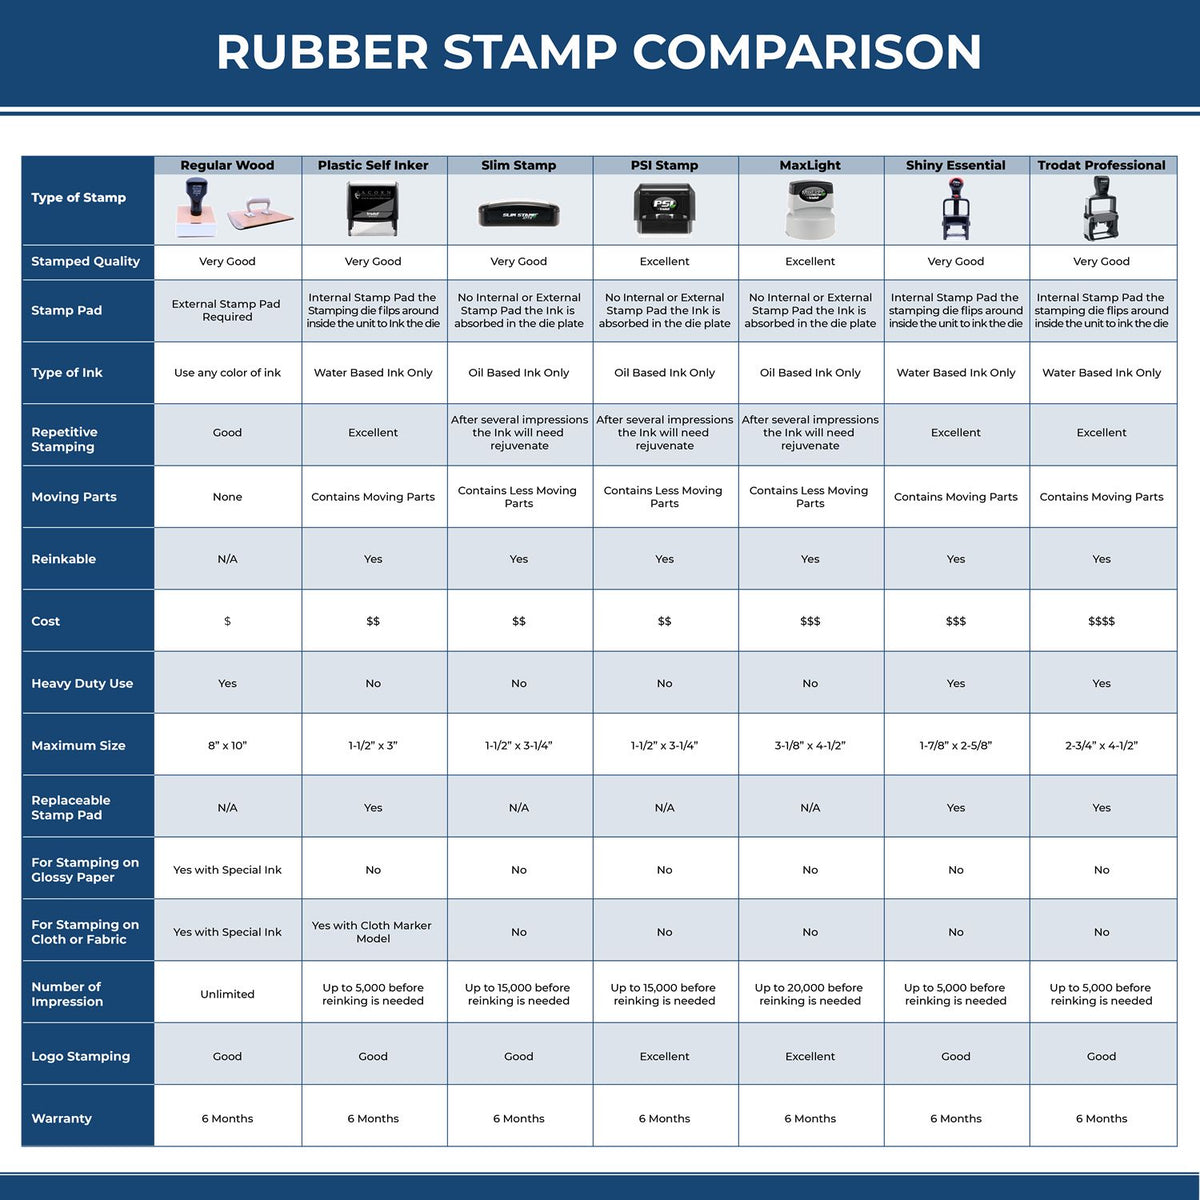 A comparison chart for the different types of mount models available for the Super Slim Louisiana Notary Public Stamp.